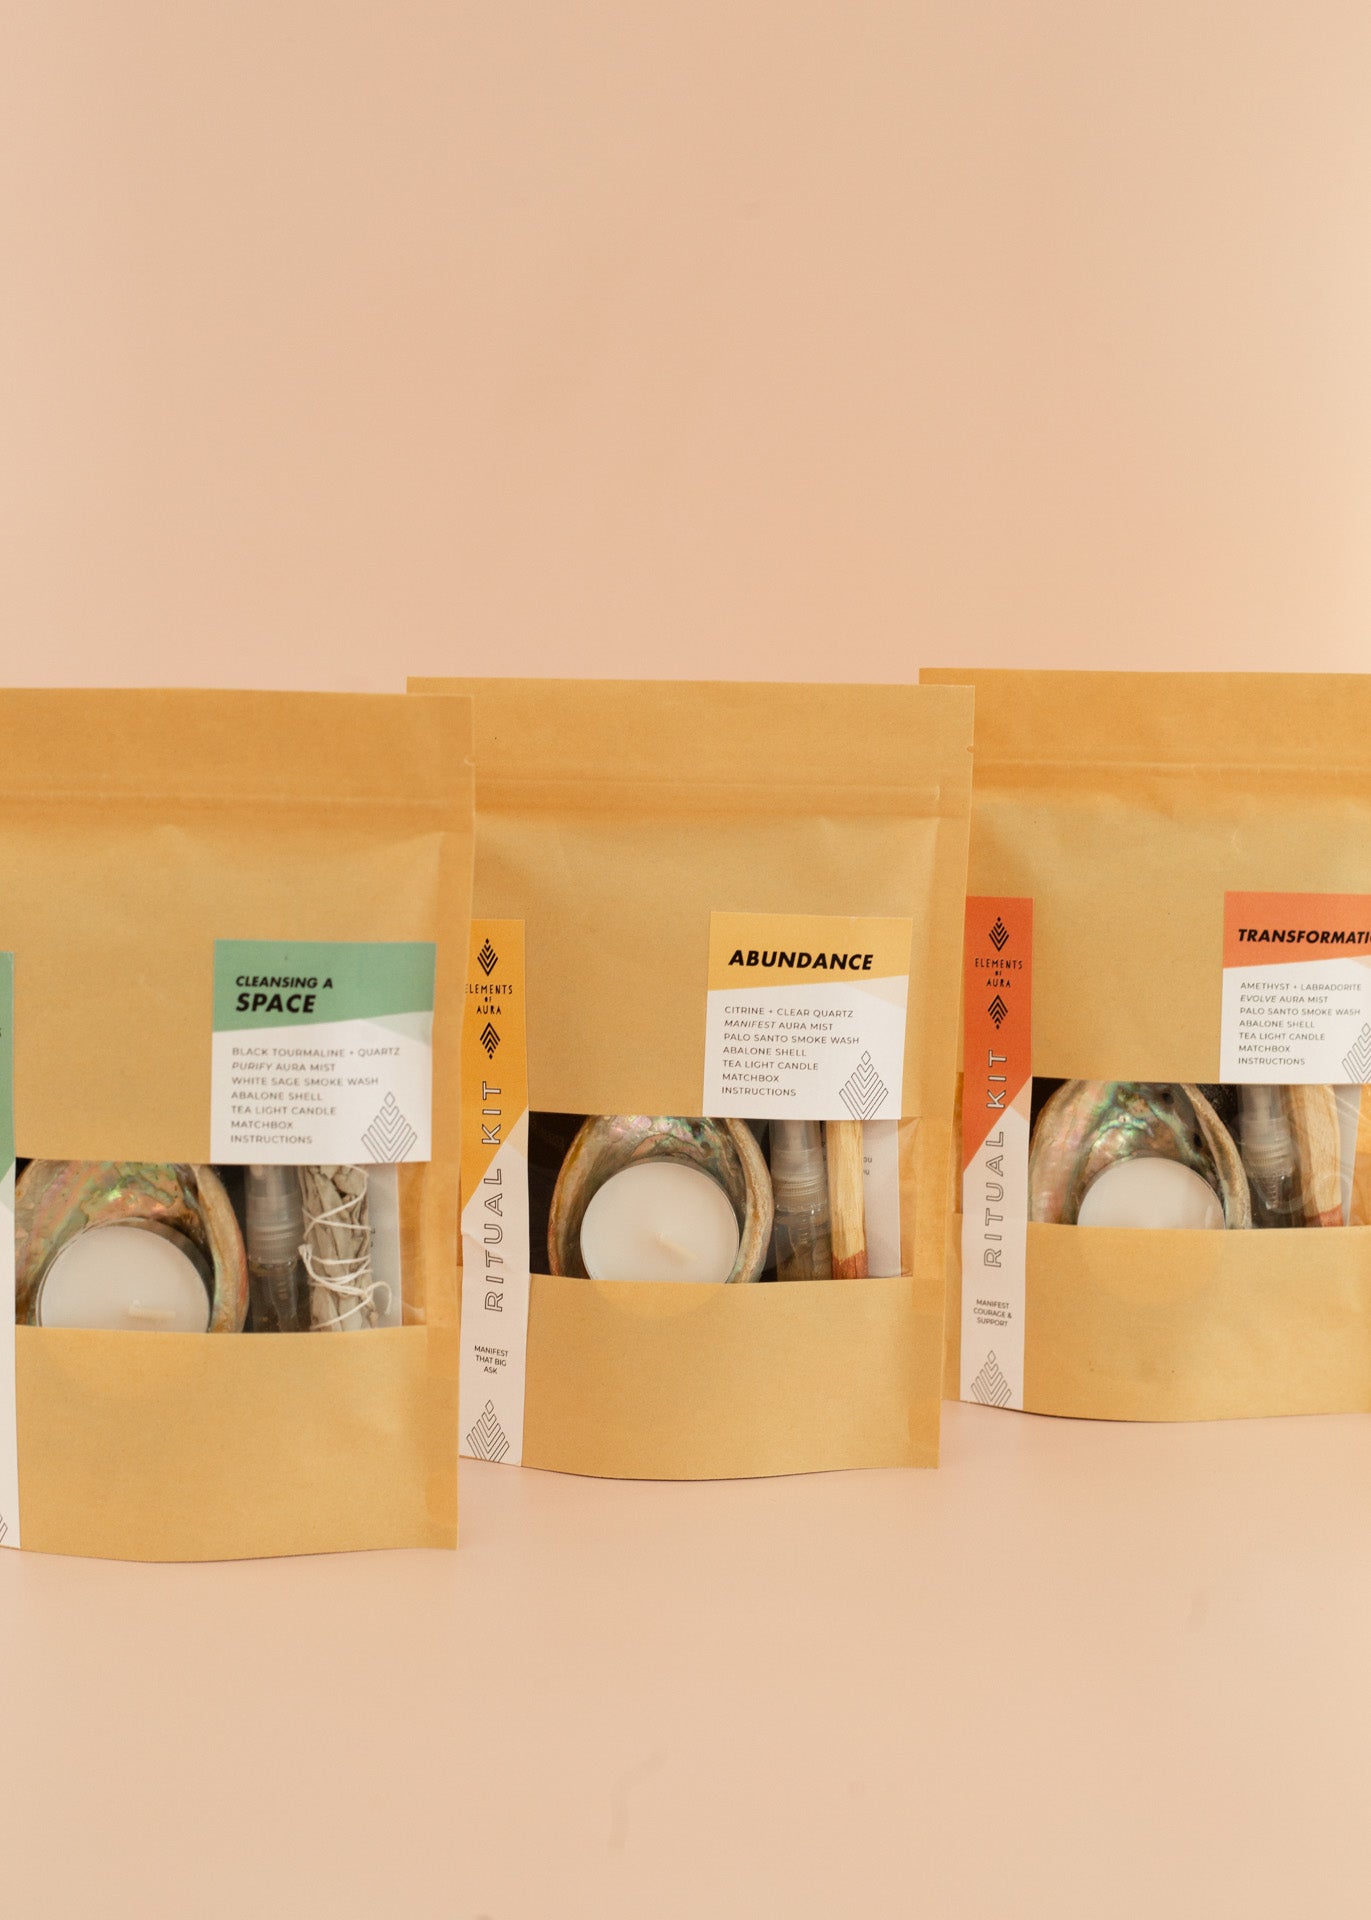 Three ritual kit bags, one cleansing a space, abundance and transformation